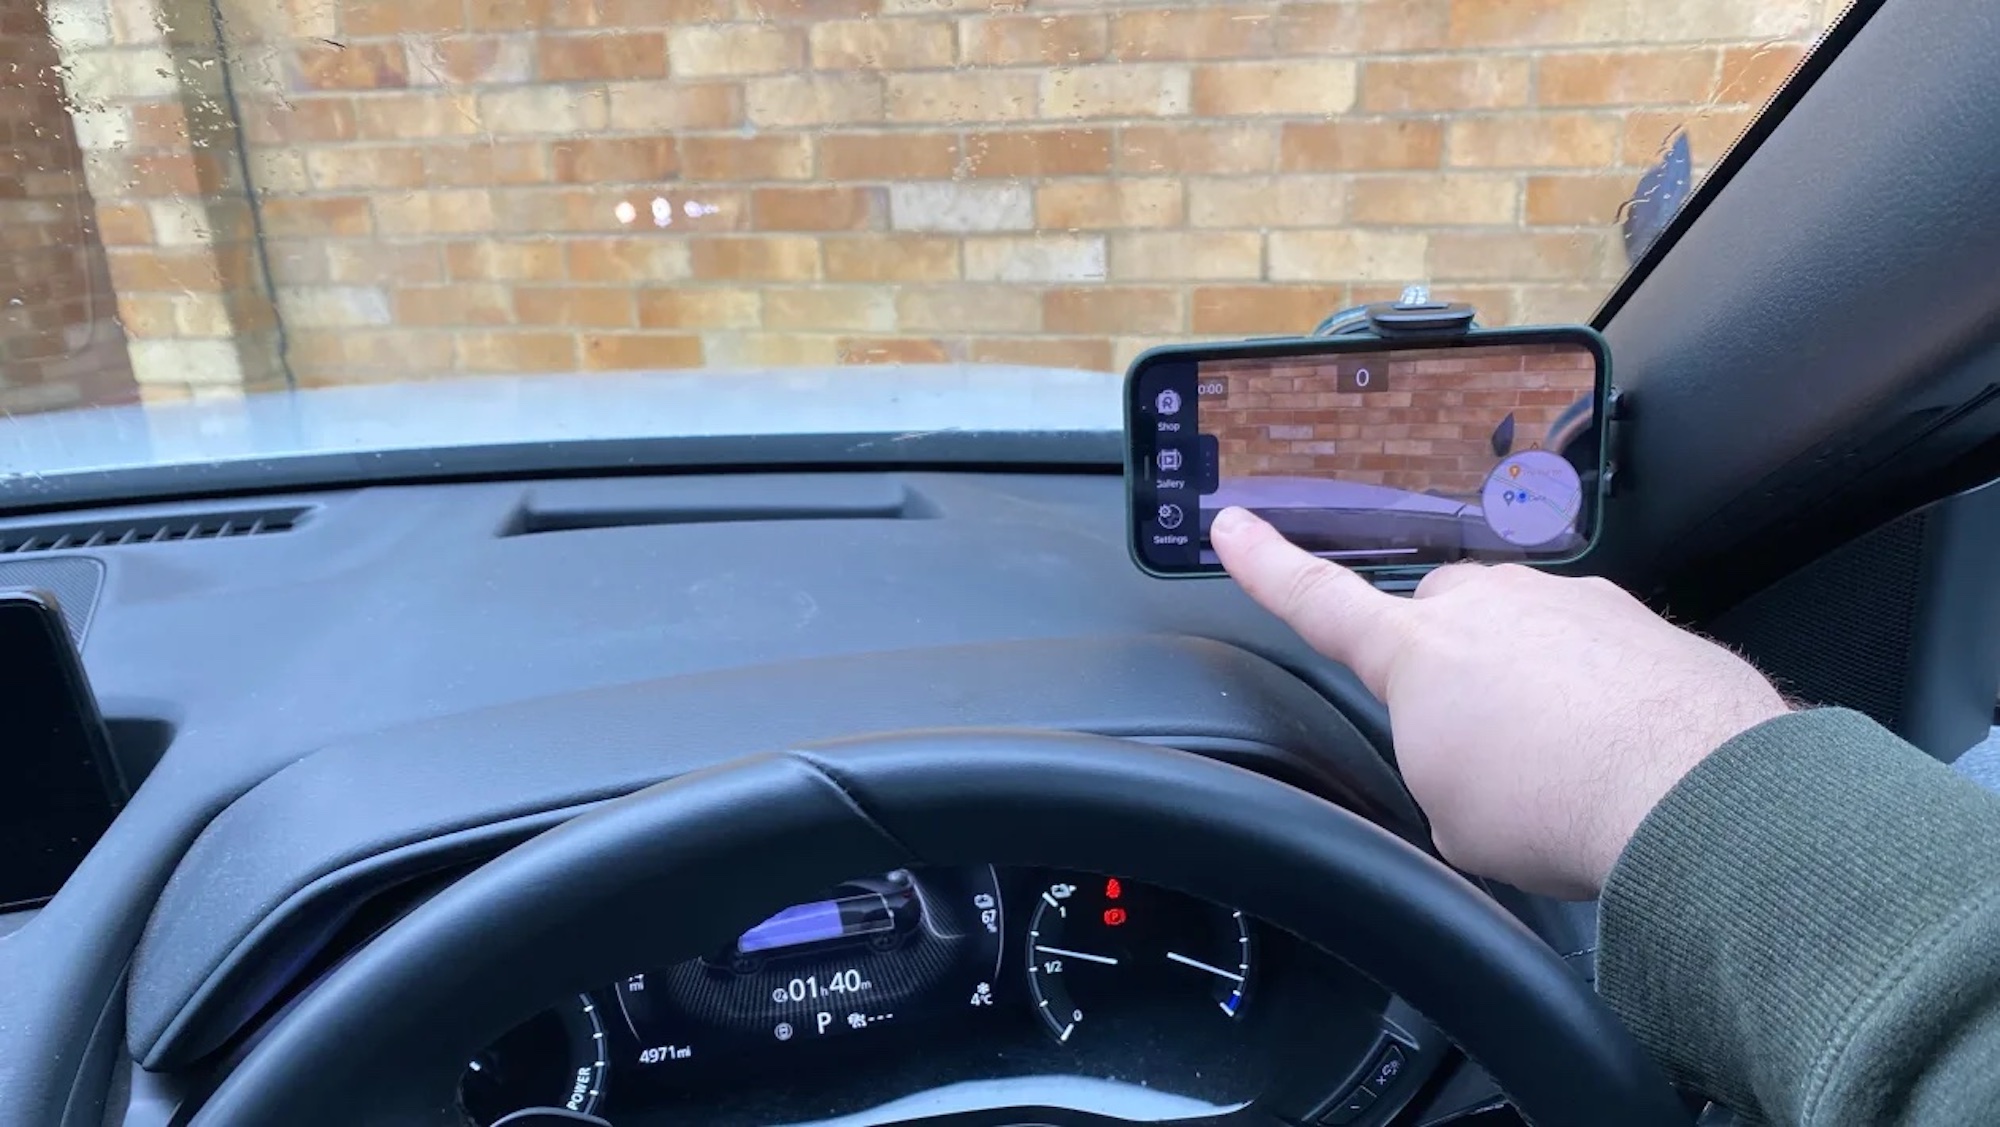 A civilian giving a generic dash cam a try. Media sourced from AutoExpress.